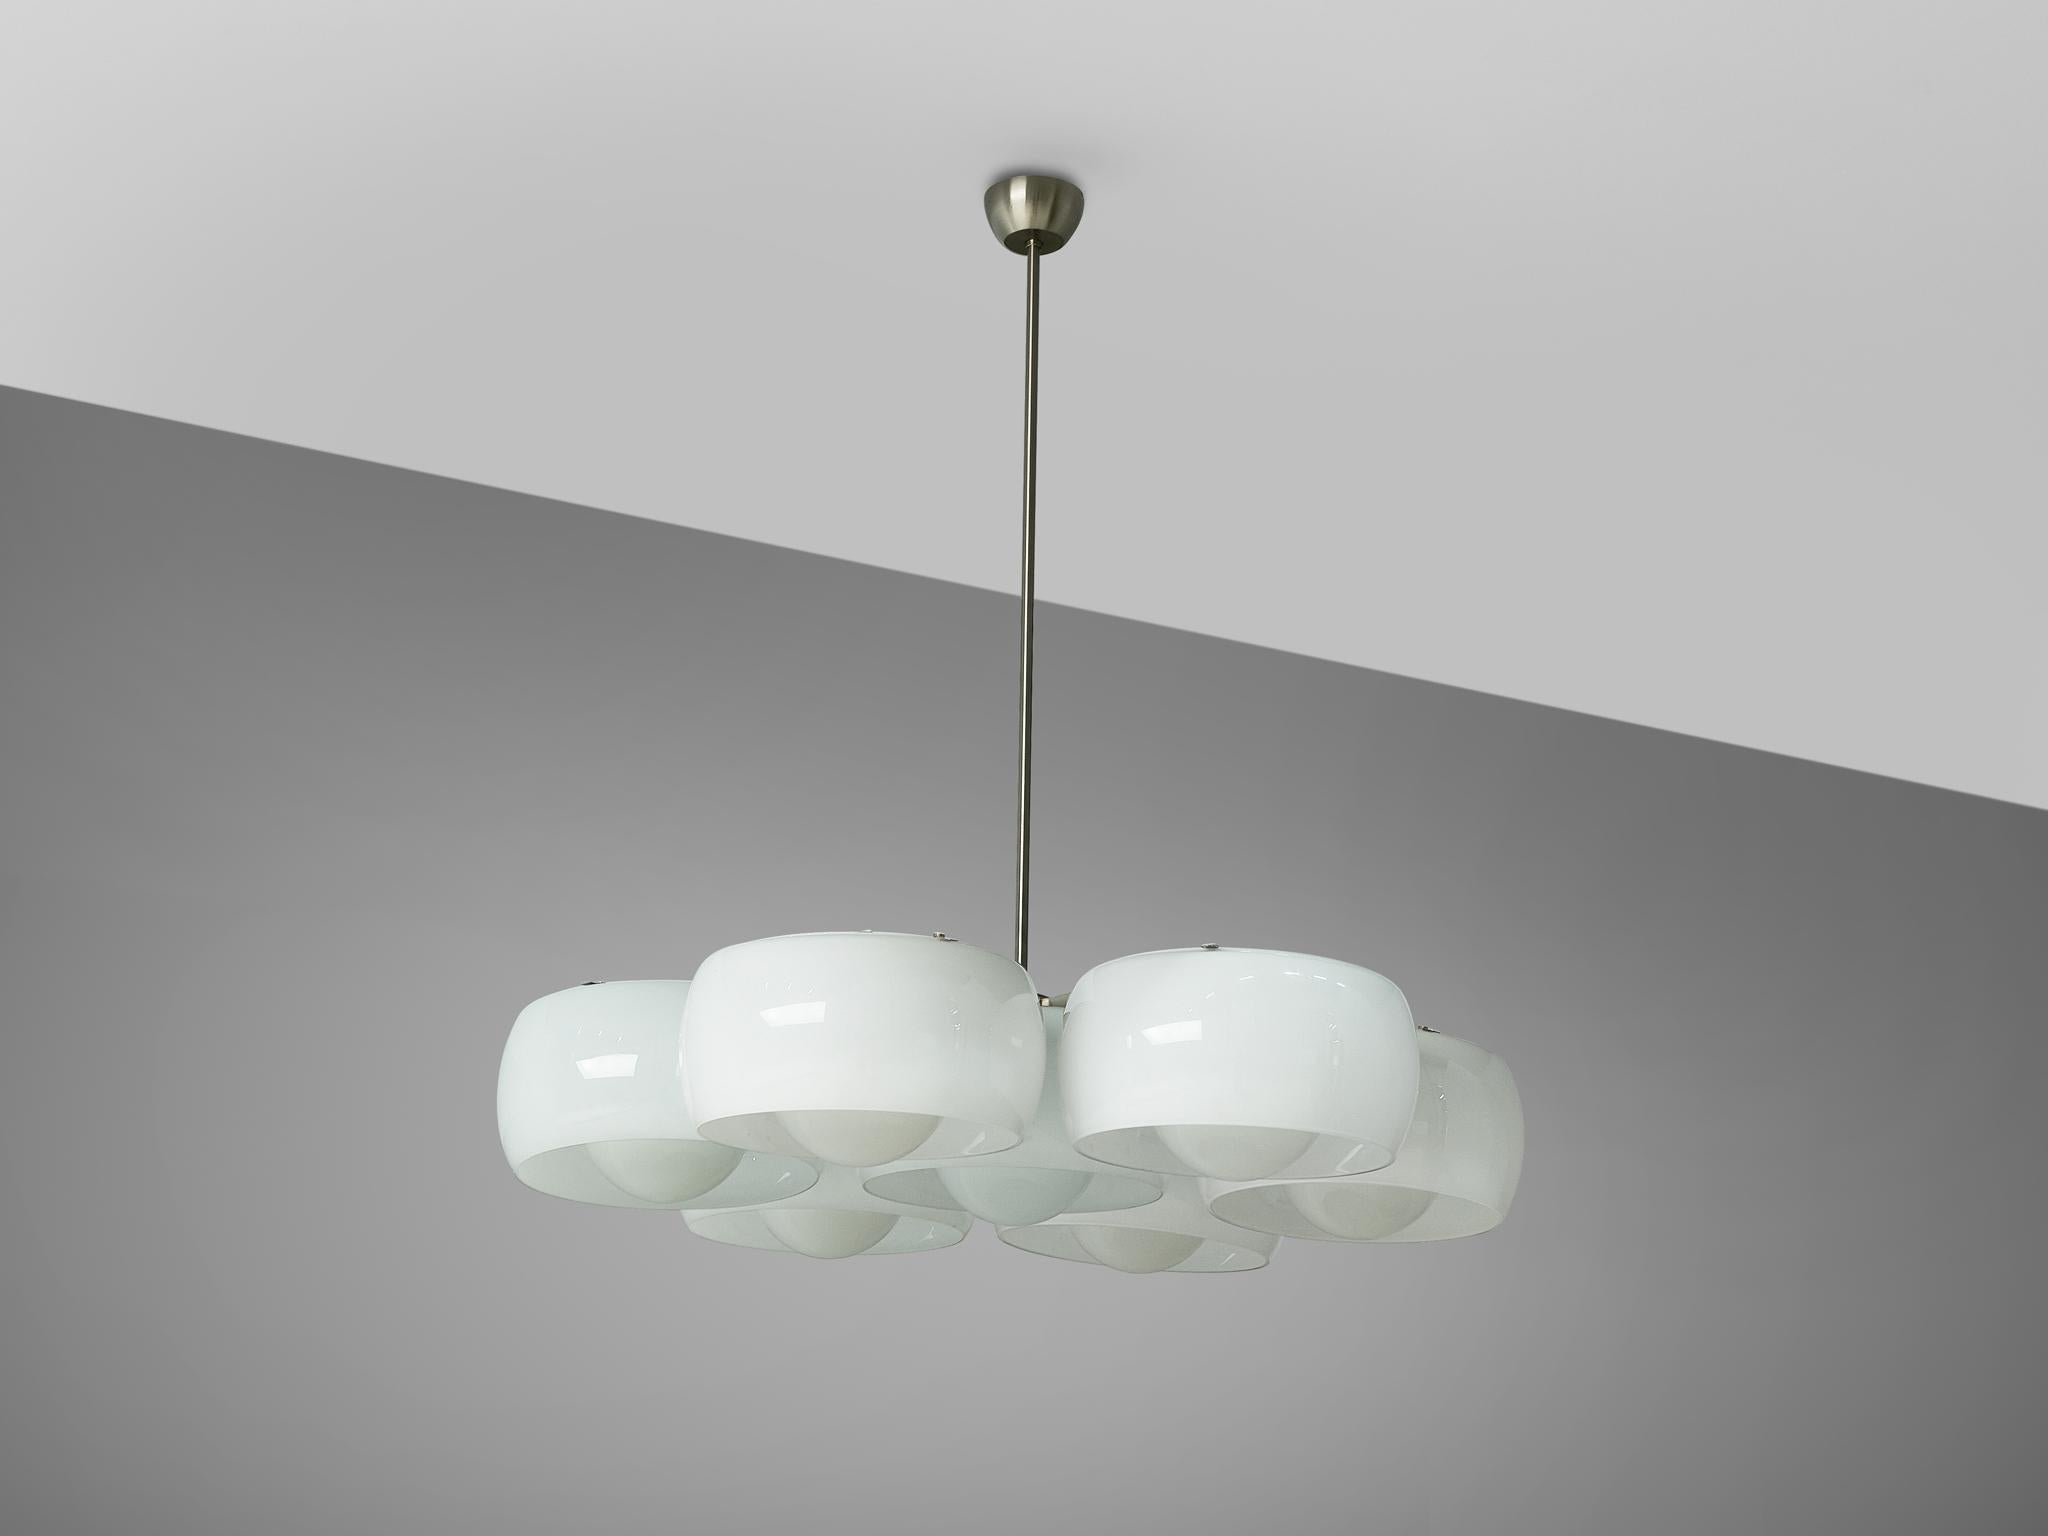 Listing for KNS: Vico Magistretti for Artemide Chandelier 'Eptaclinio' 2